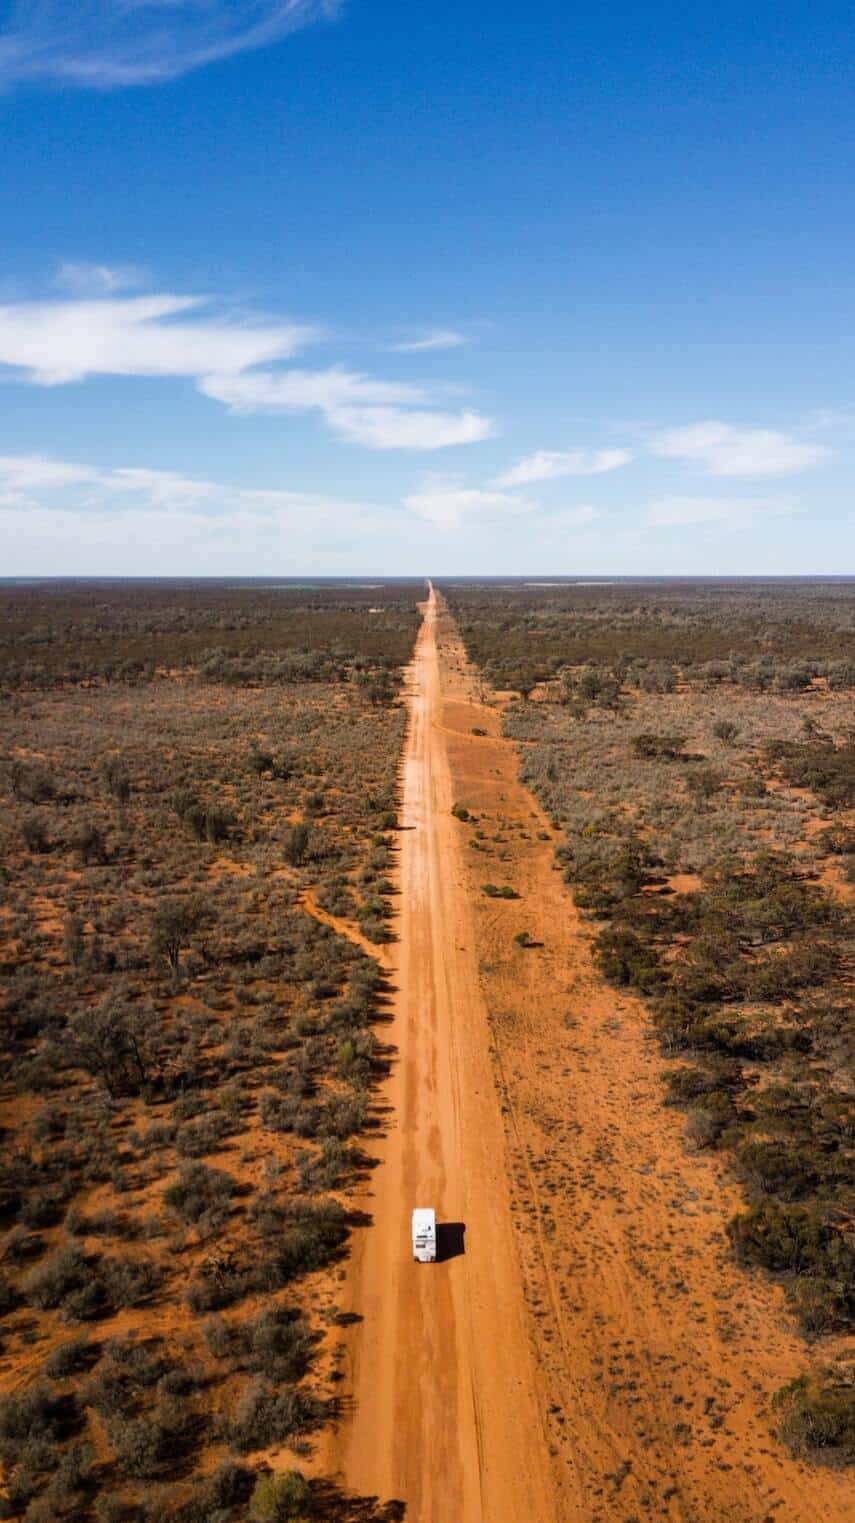 Red dirt road flanked by scrub and bush